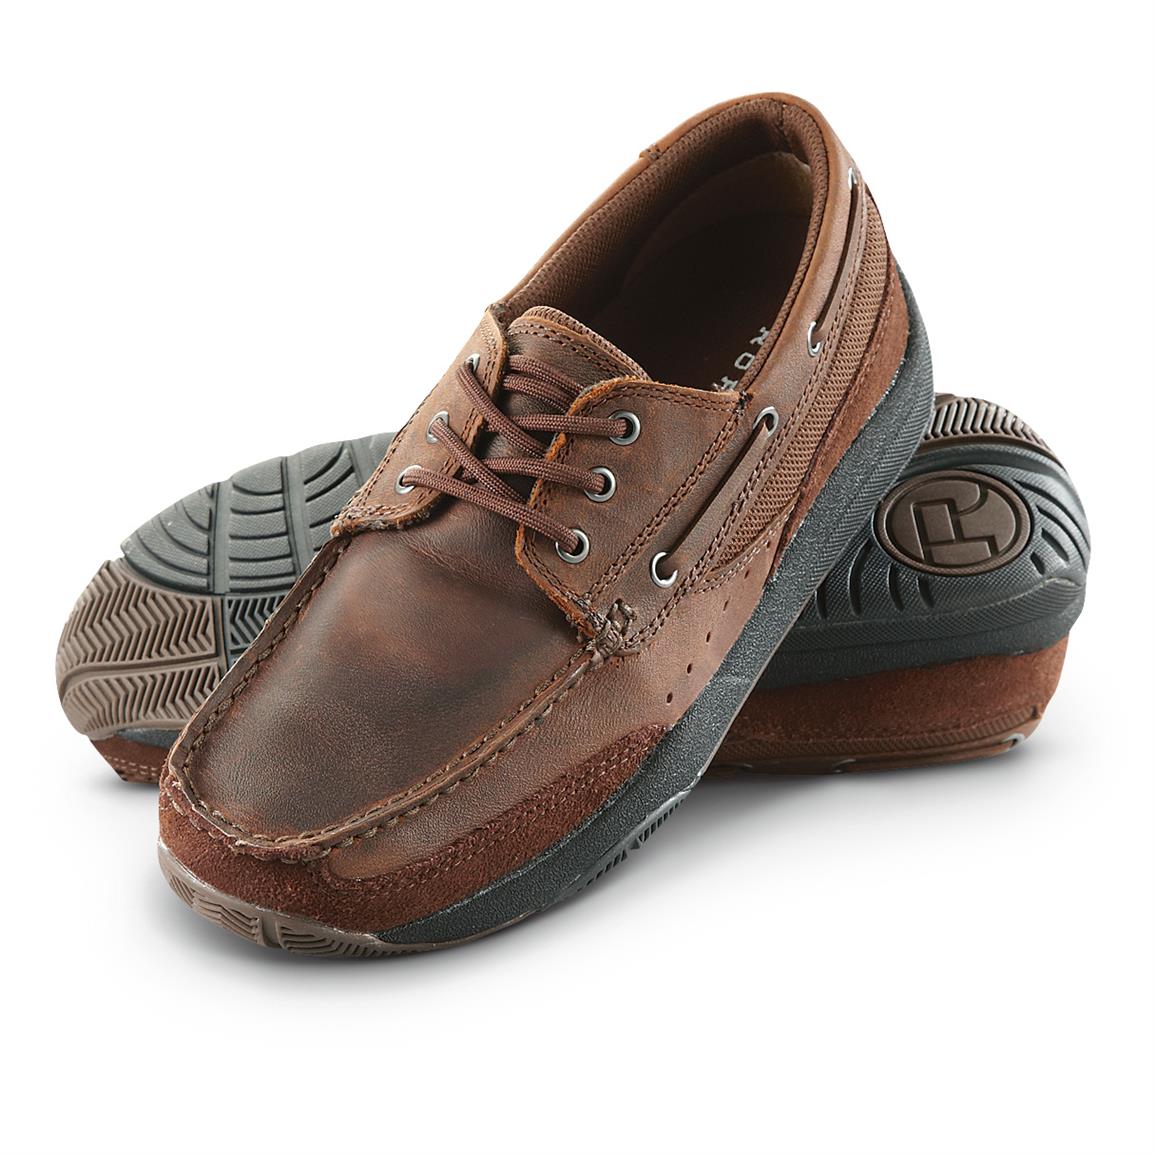 Roper Oxford Casual Shoes - 619106, Casual Shoes at Sportsman's Guide